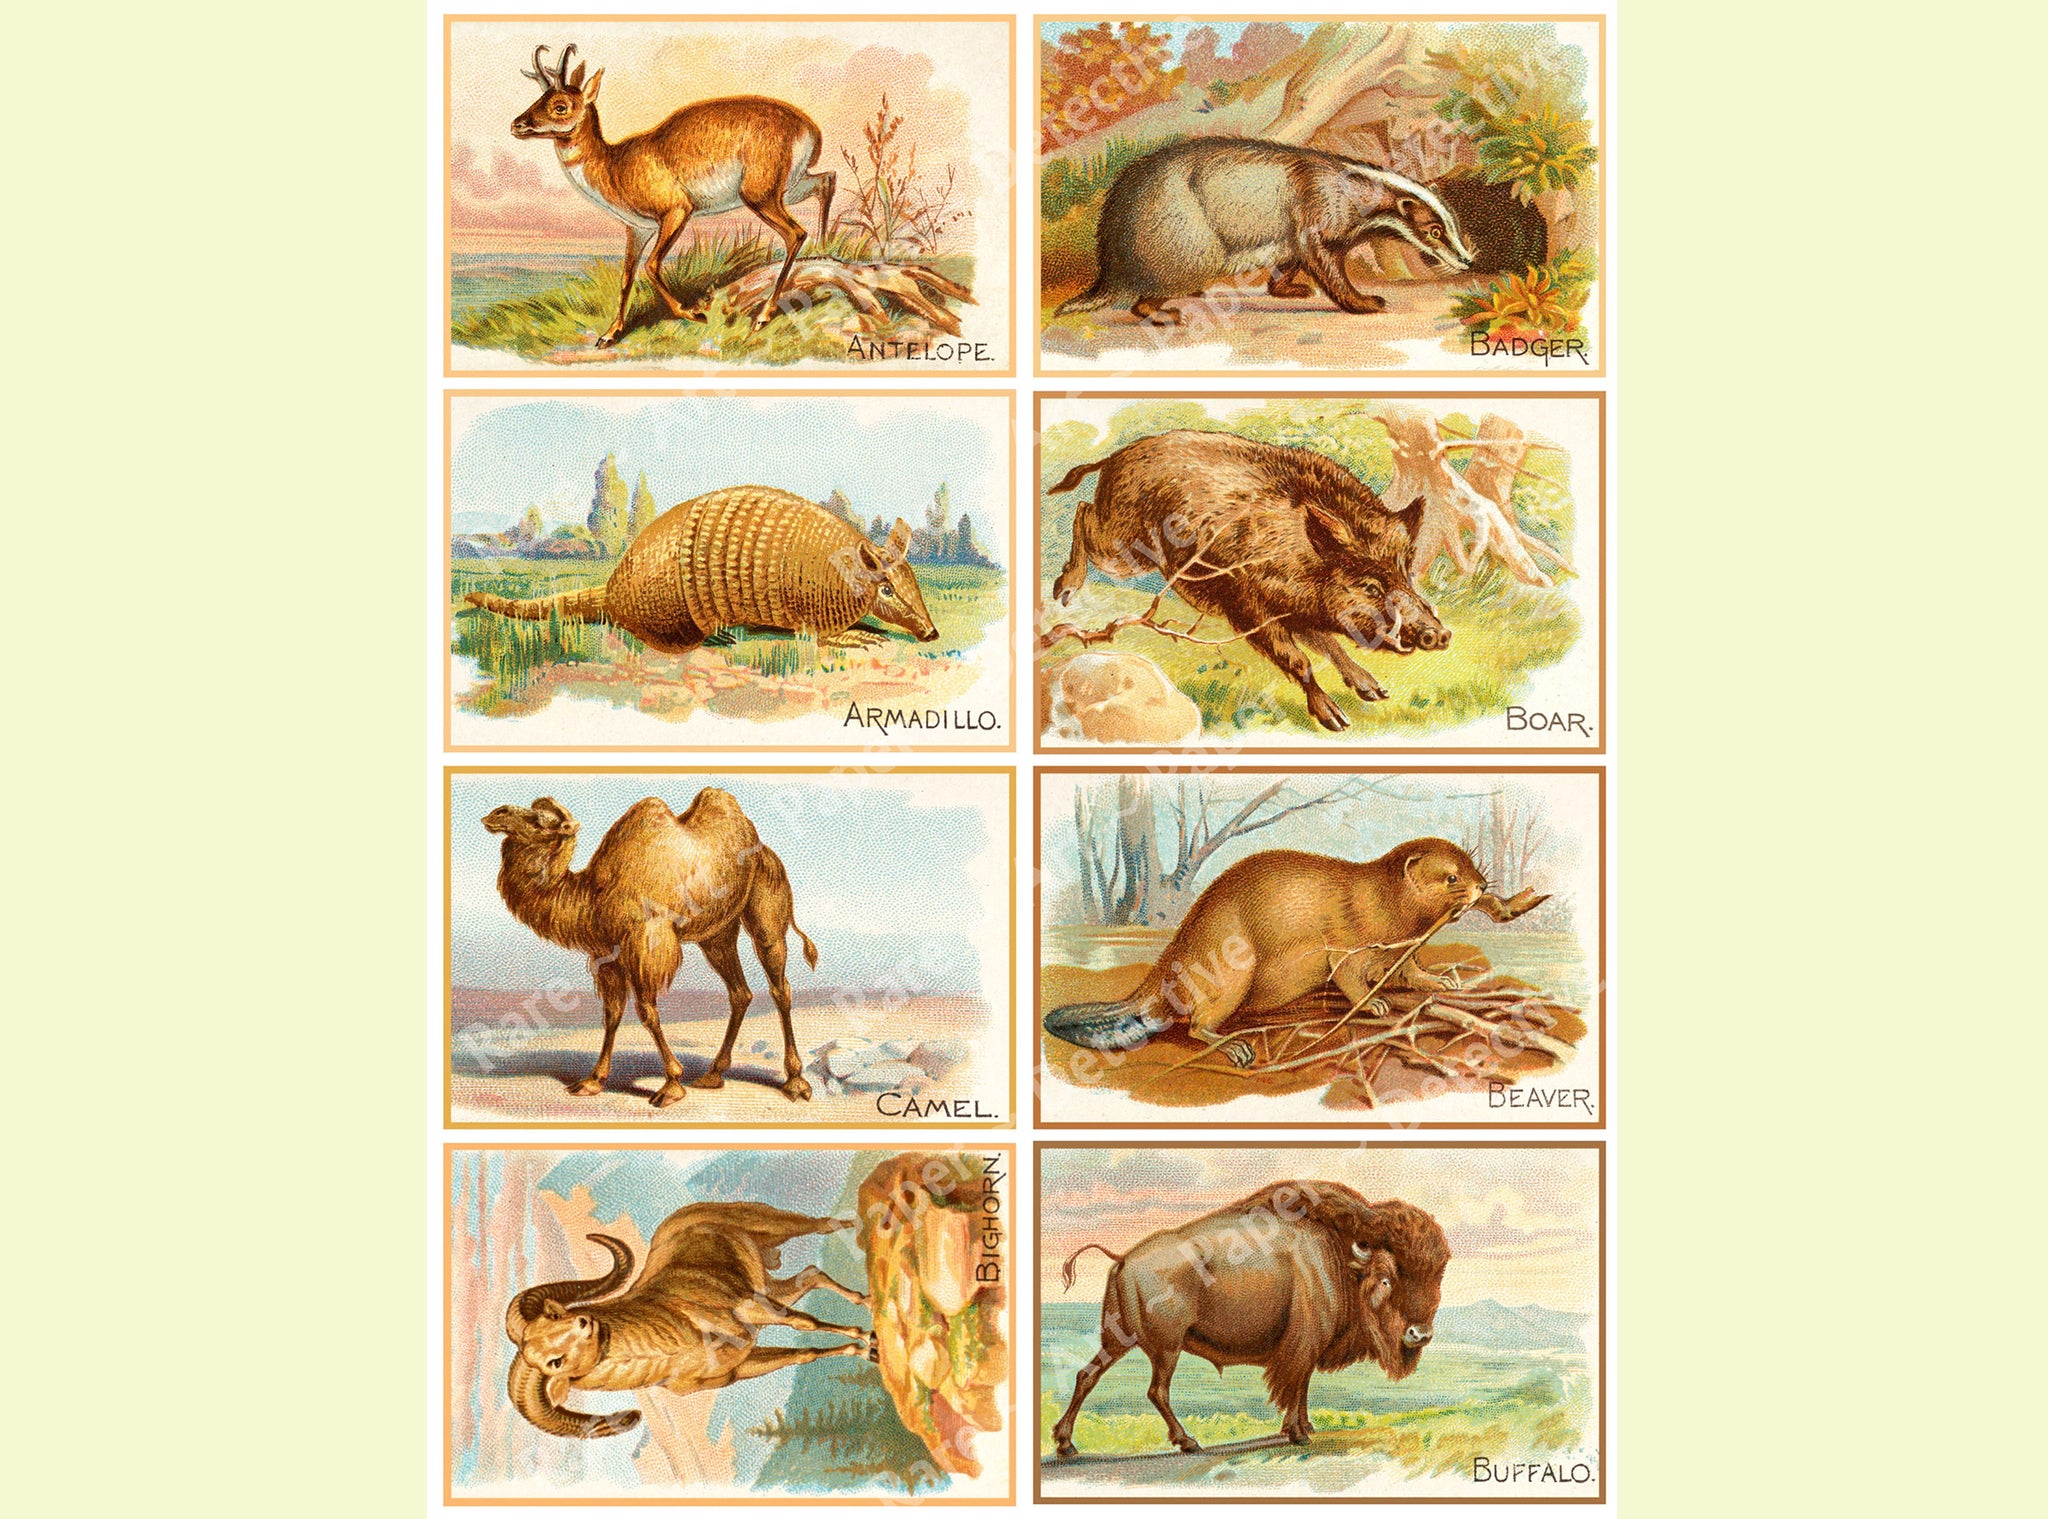 Animal Illustrations, Home Décor Projects, Bookmarks or Gift Making, Animal Trade Card Advertising Drawings, 4" Stickers on 1 Sheet, 1200